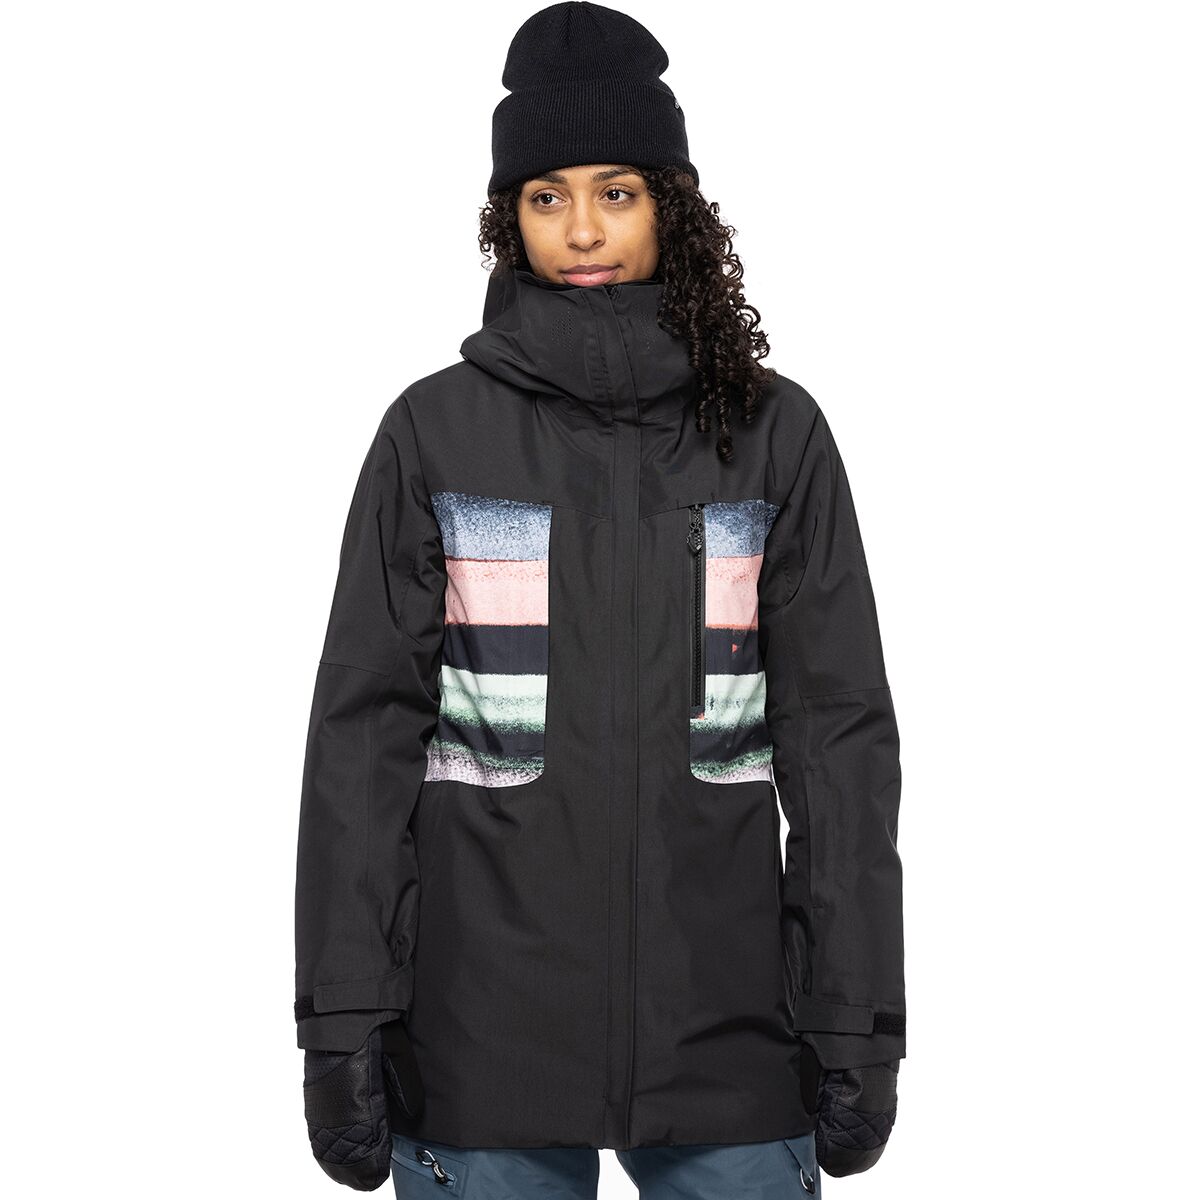 686 Mantra Insulated Jacket - Women's